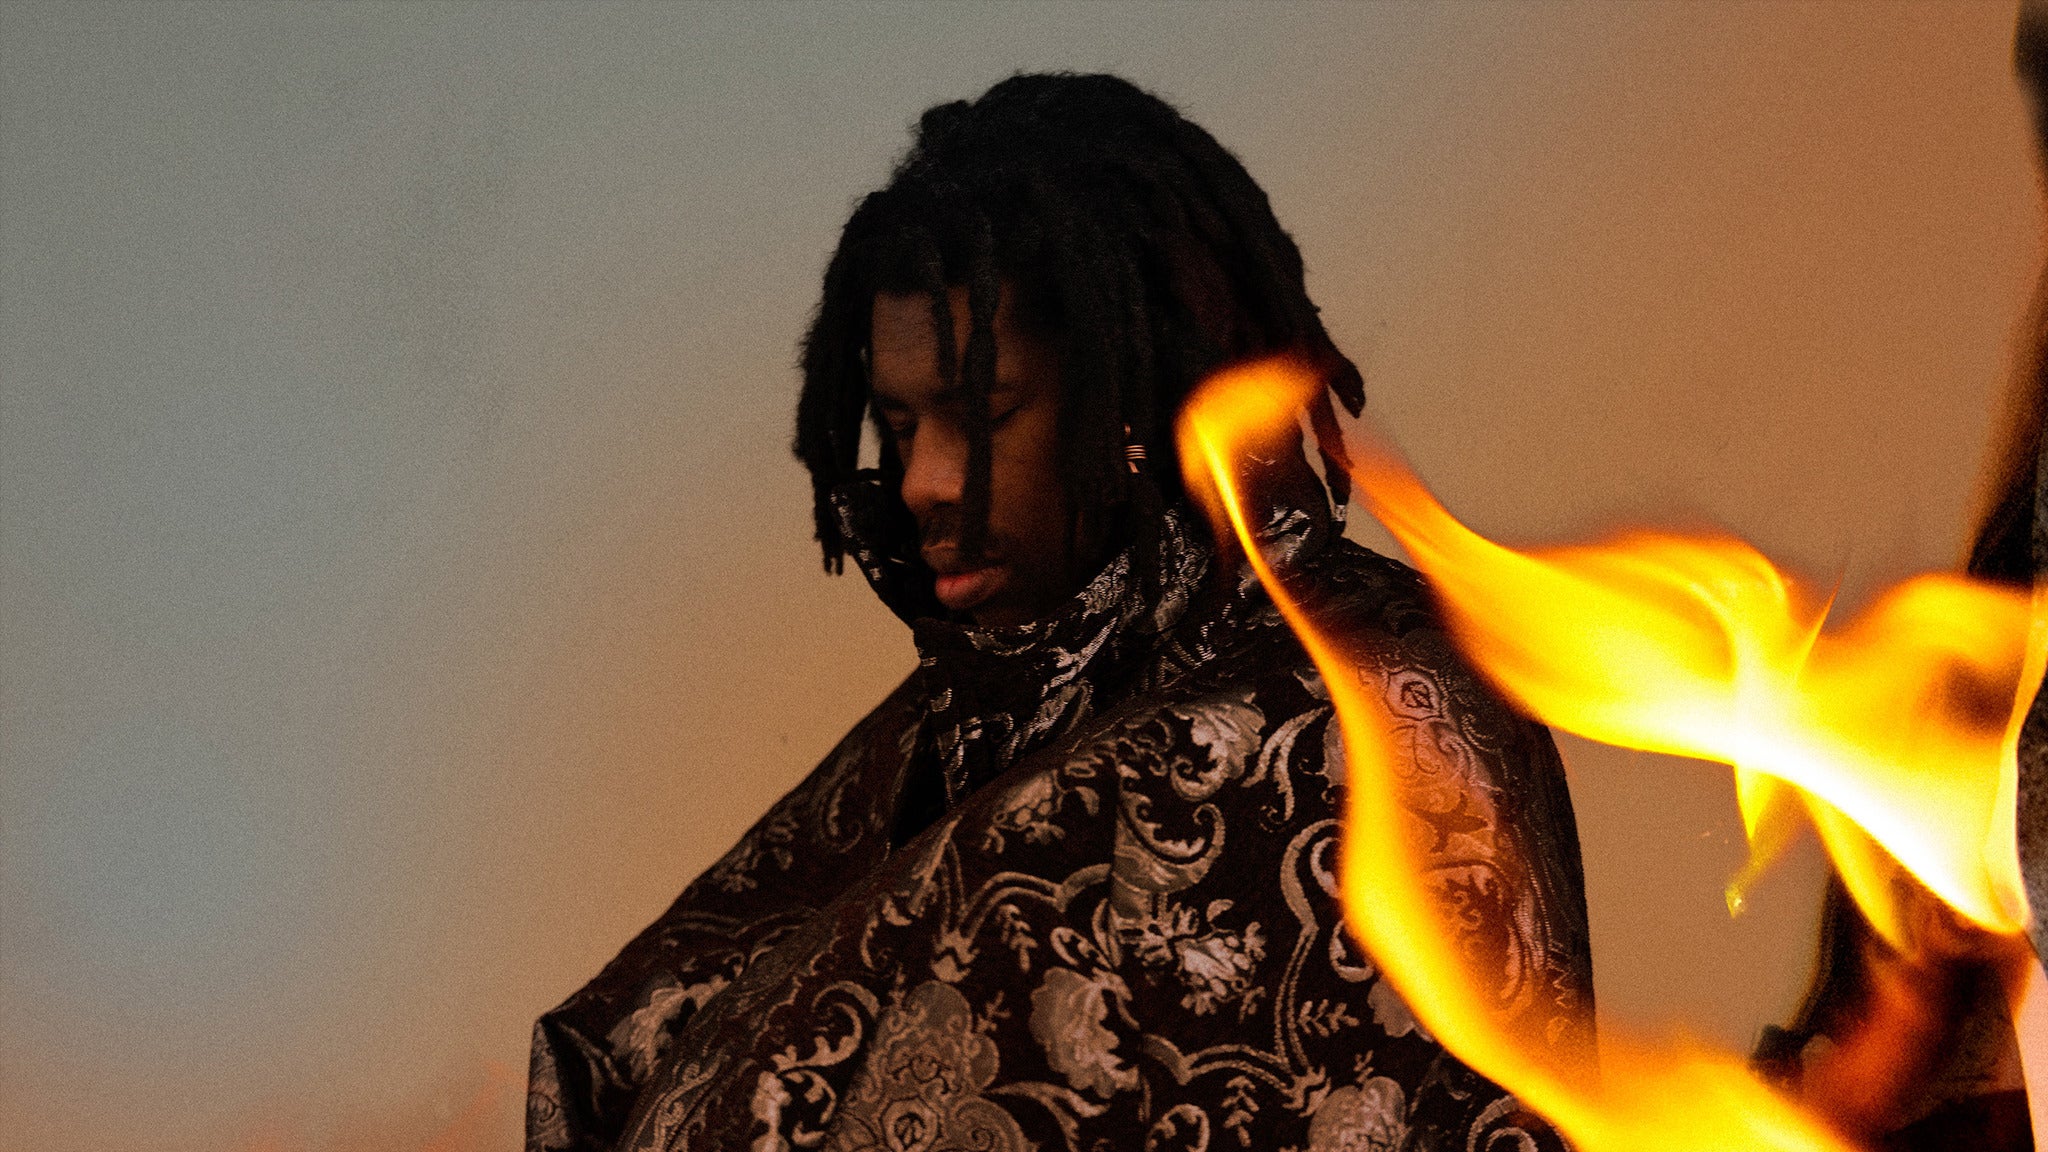 Flying Lotus in 3D in Washington promo photo for I.m.p. presale offer code